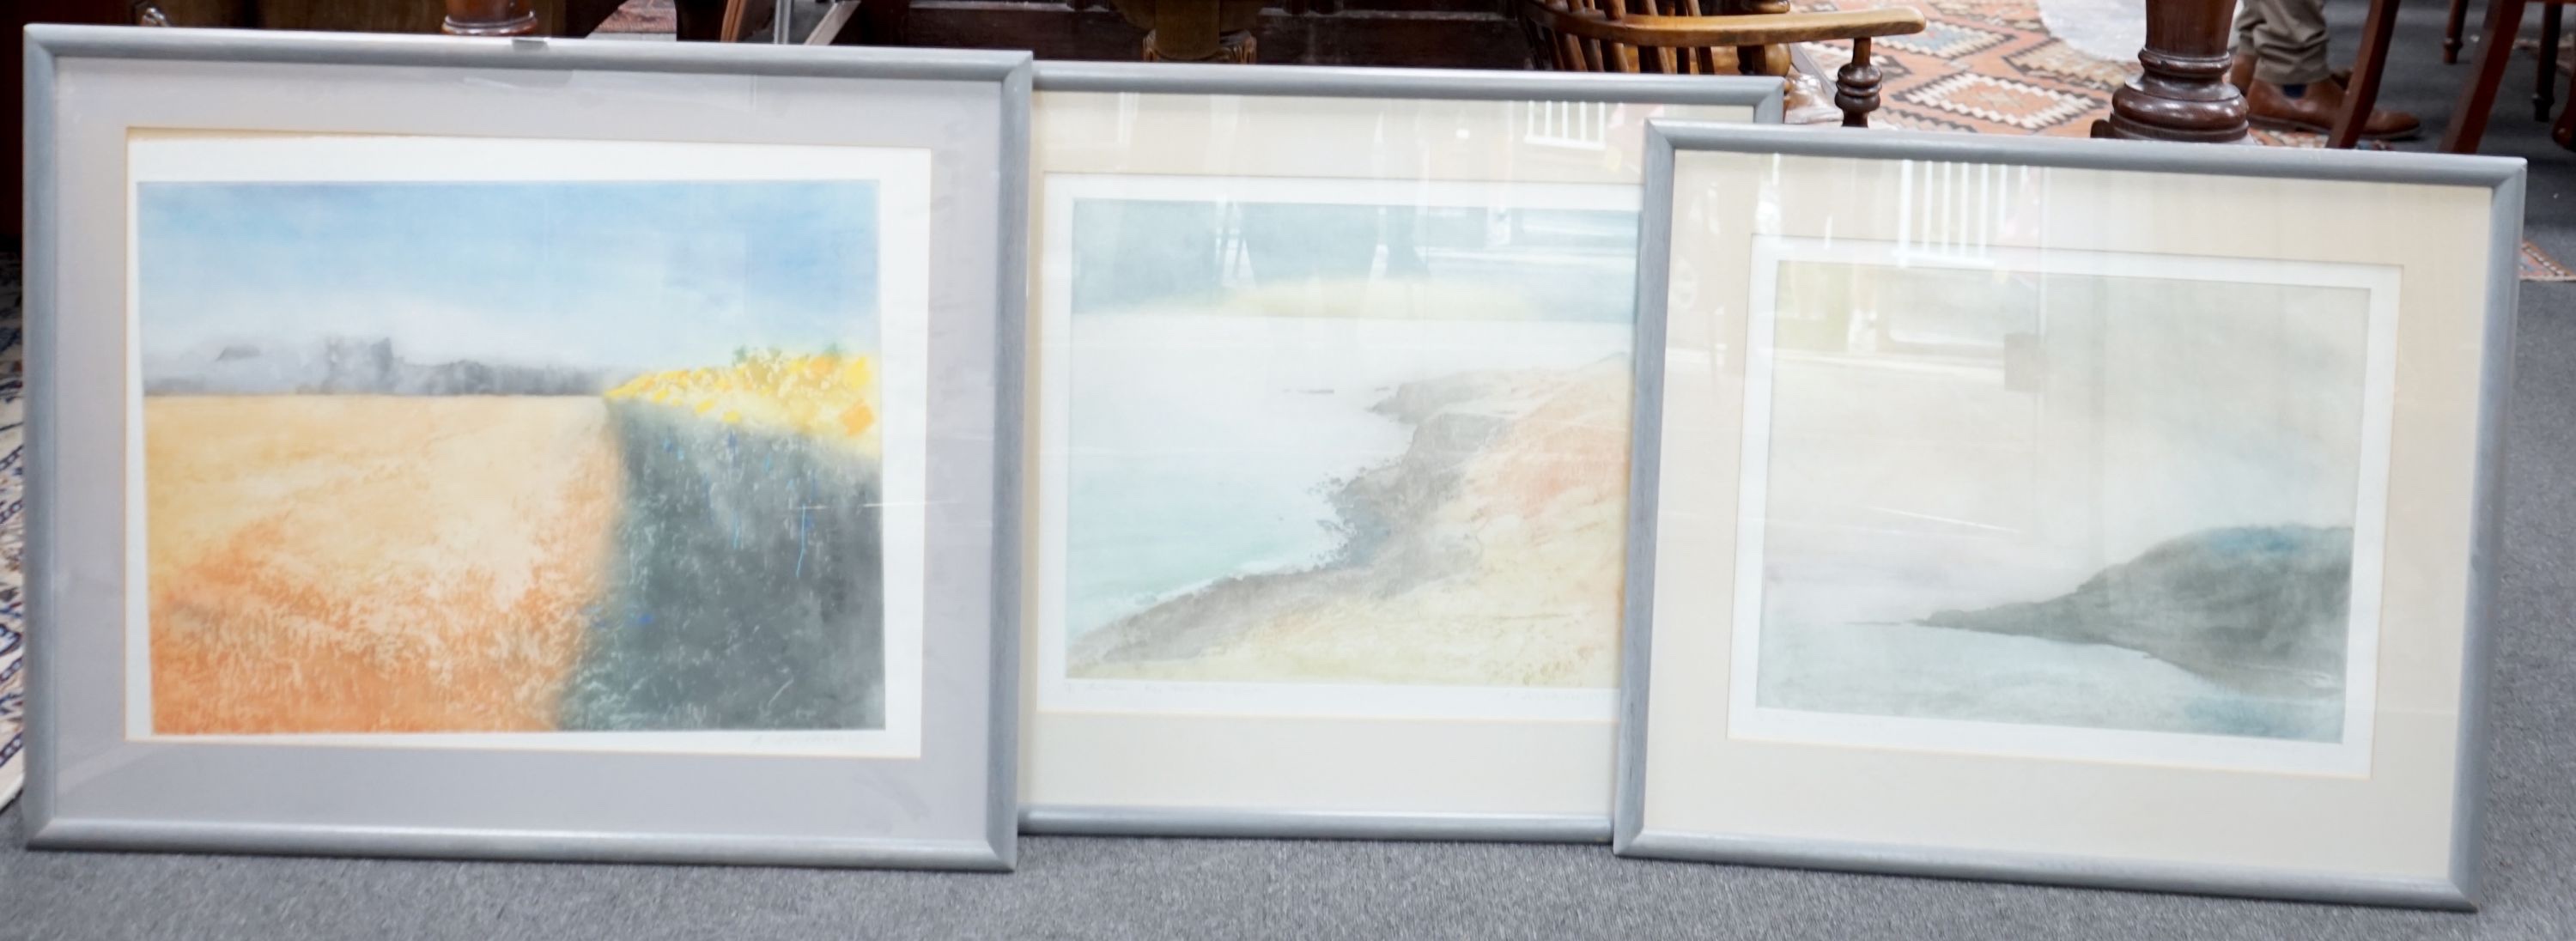 Donald Wilkinson (1937-), three screenprints, 'Camus Nan Gael', 'Autumn Eigg' and 'Edge of the Sunflower field, Provence', all signed in pencil, largest 48 x 63cm